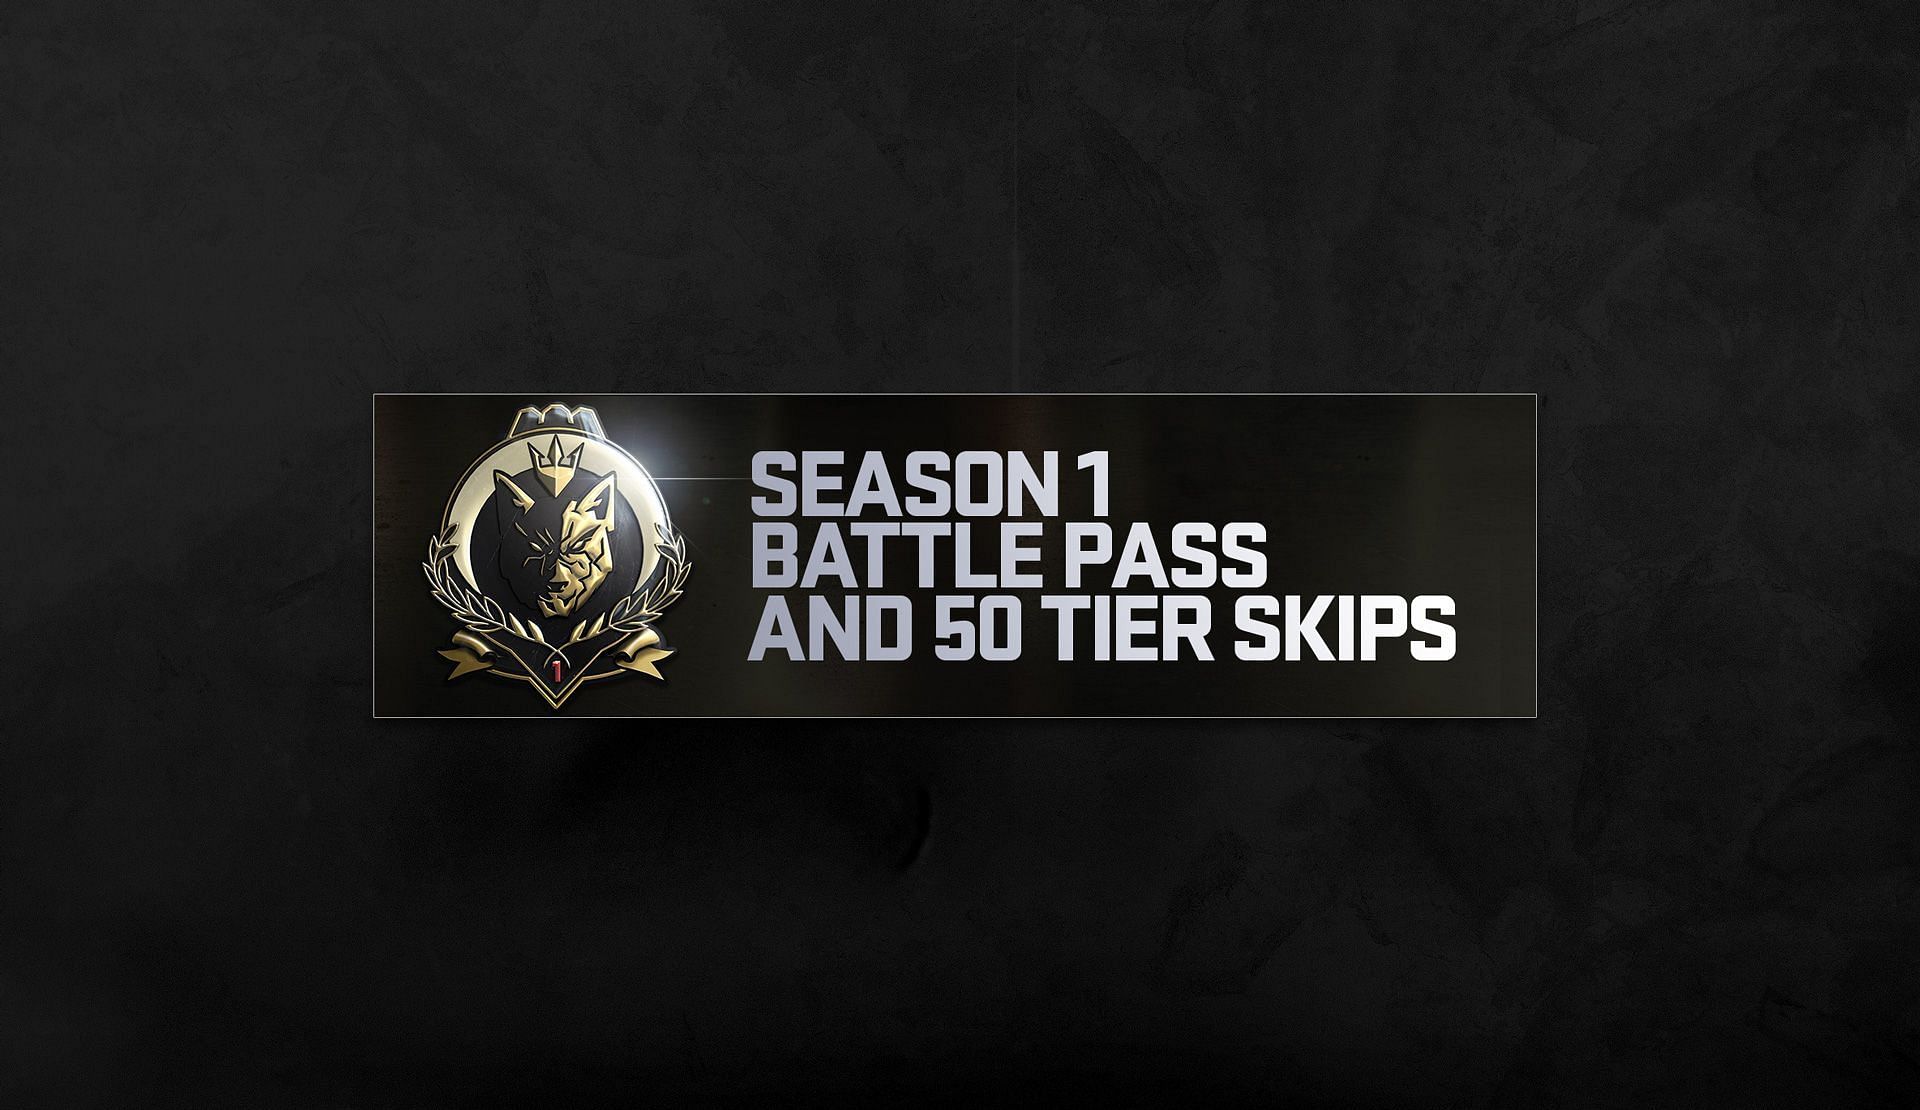 Battle Pass Season One and 50 Tier Skips in Modern Warfare 2 (image via Activision)